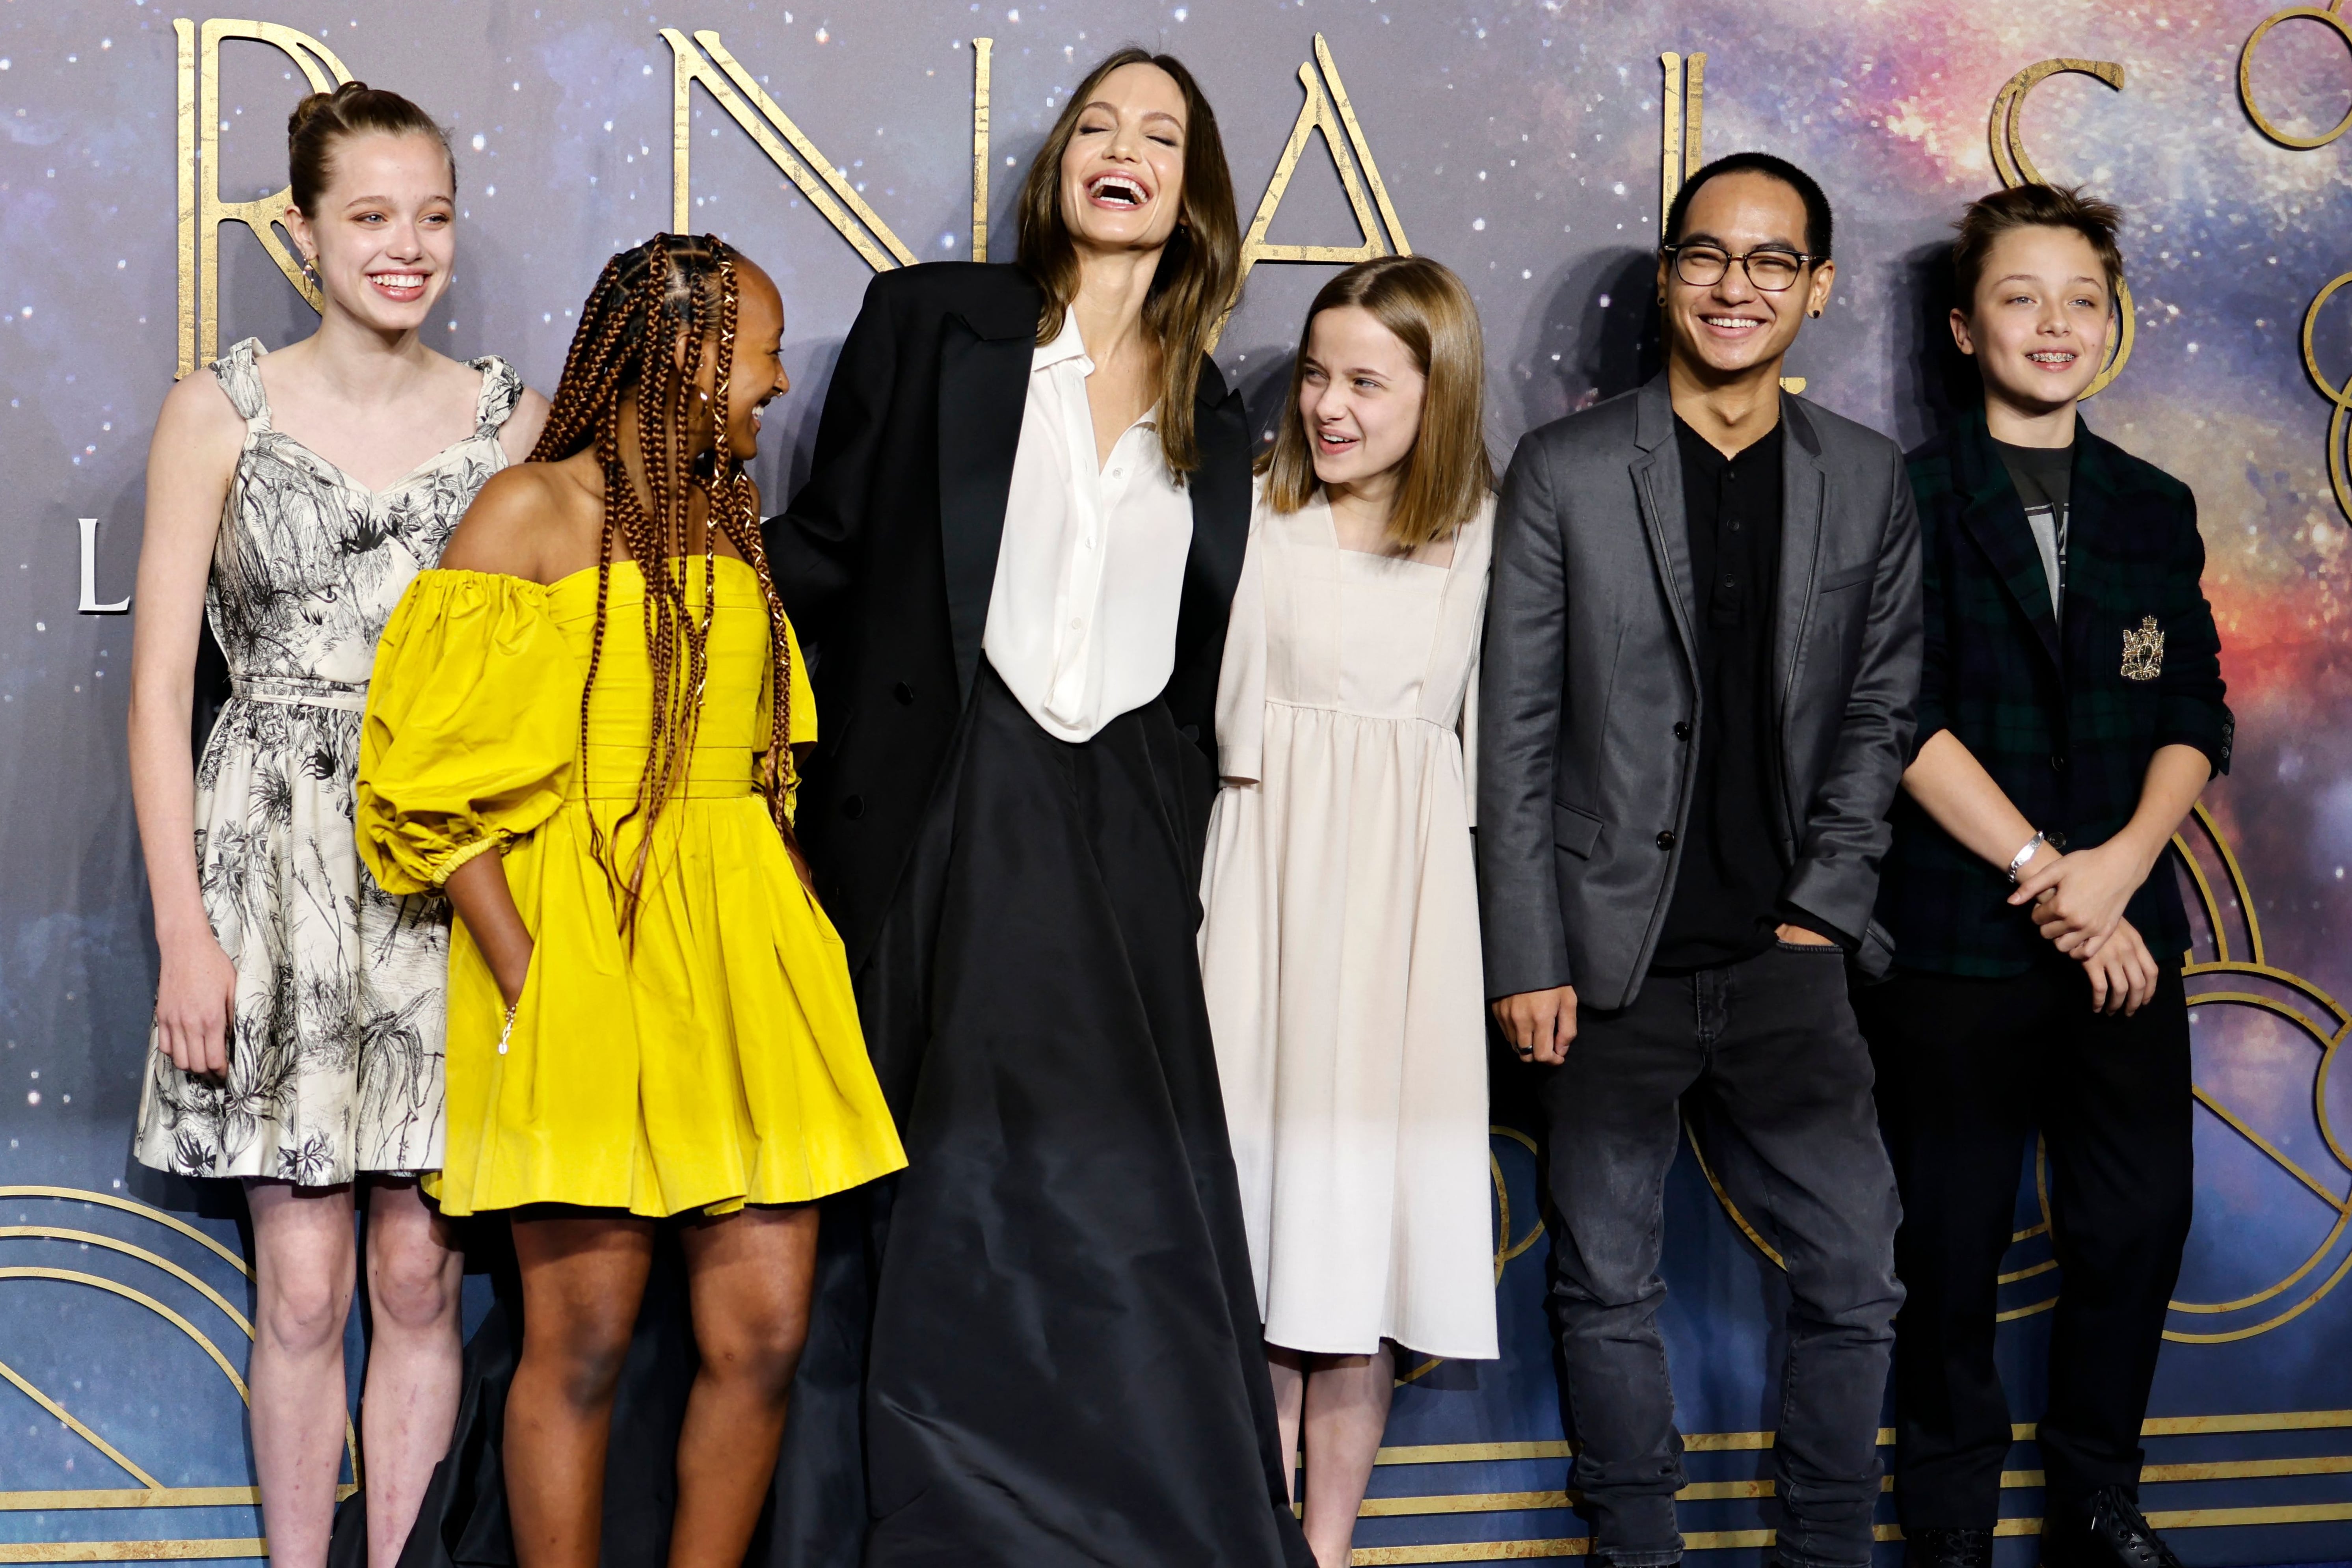 Can You Believe Half of Brad Pitt and Angelina Jolie’s Kids Are Young Adults?